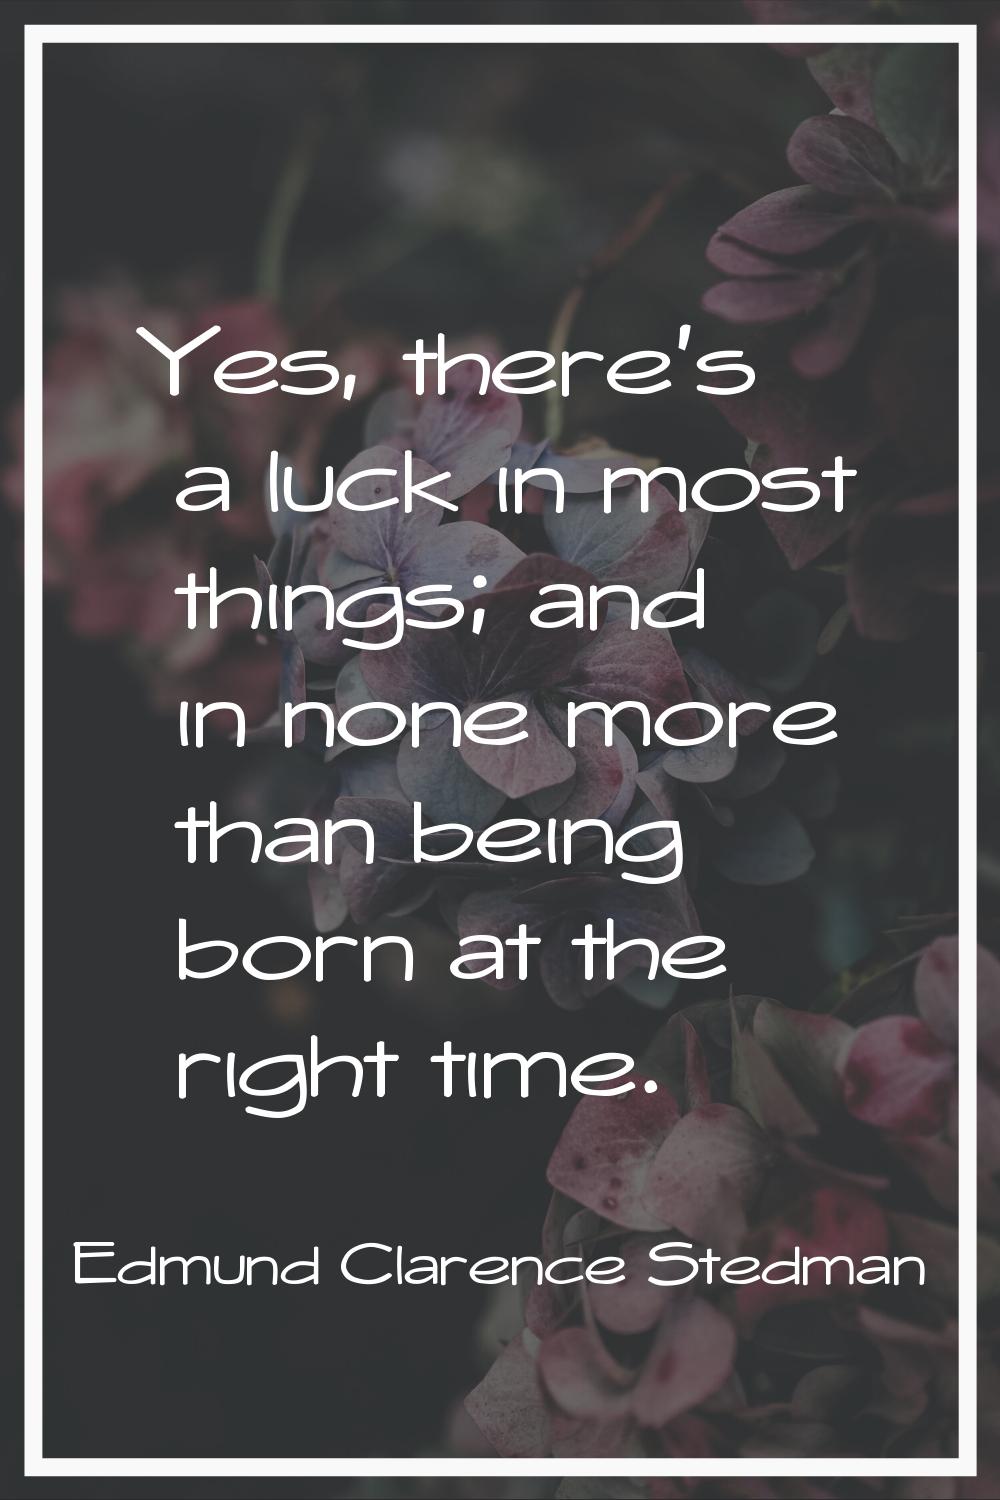 Yes, there's a luck in most things; and in none more than being born at the right time.